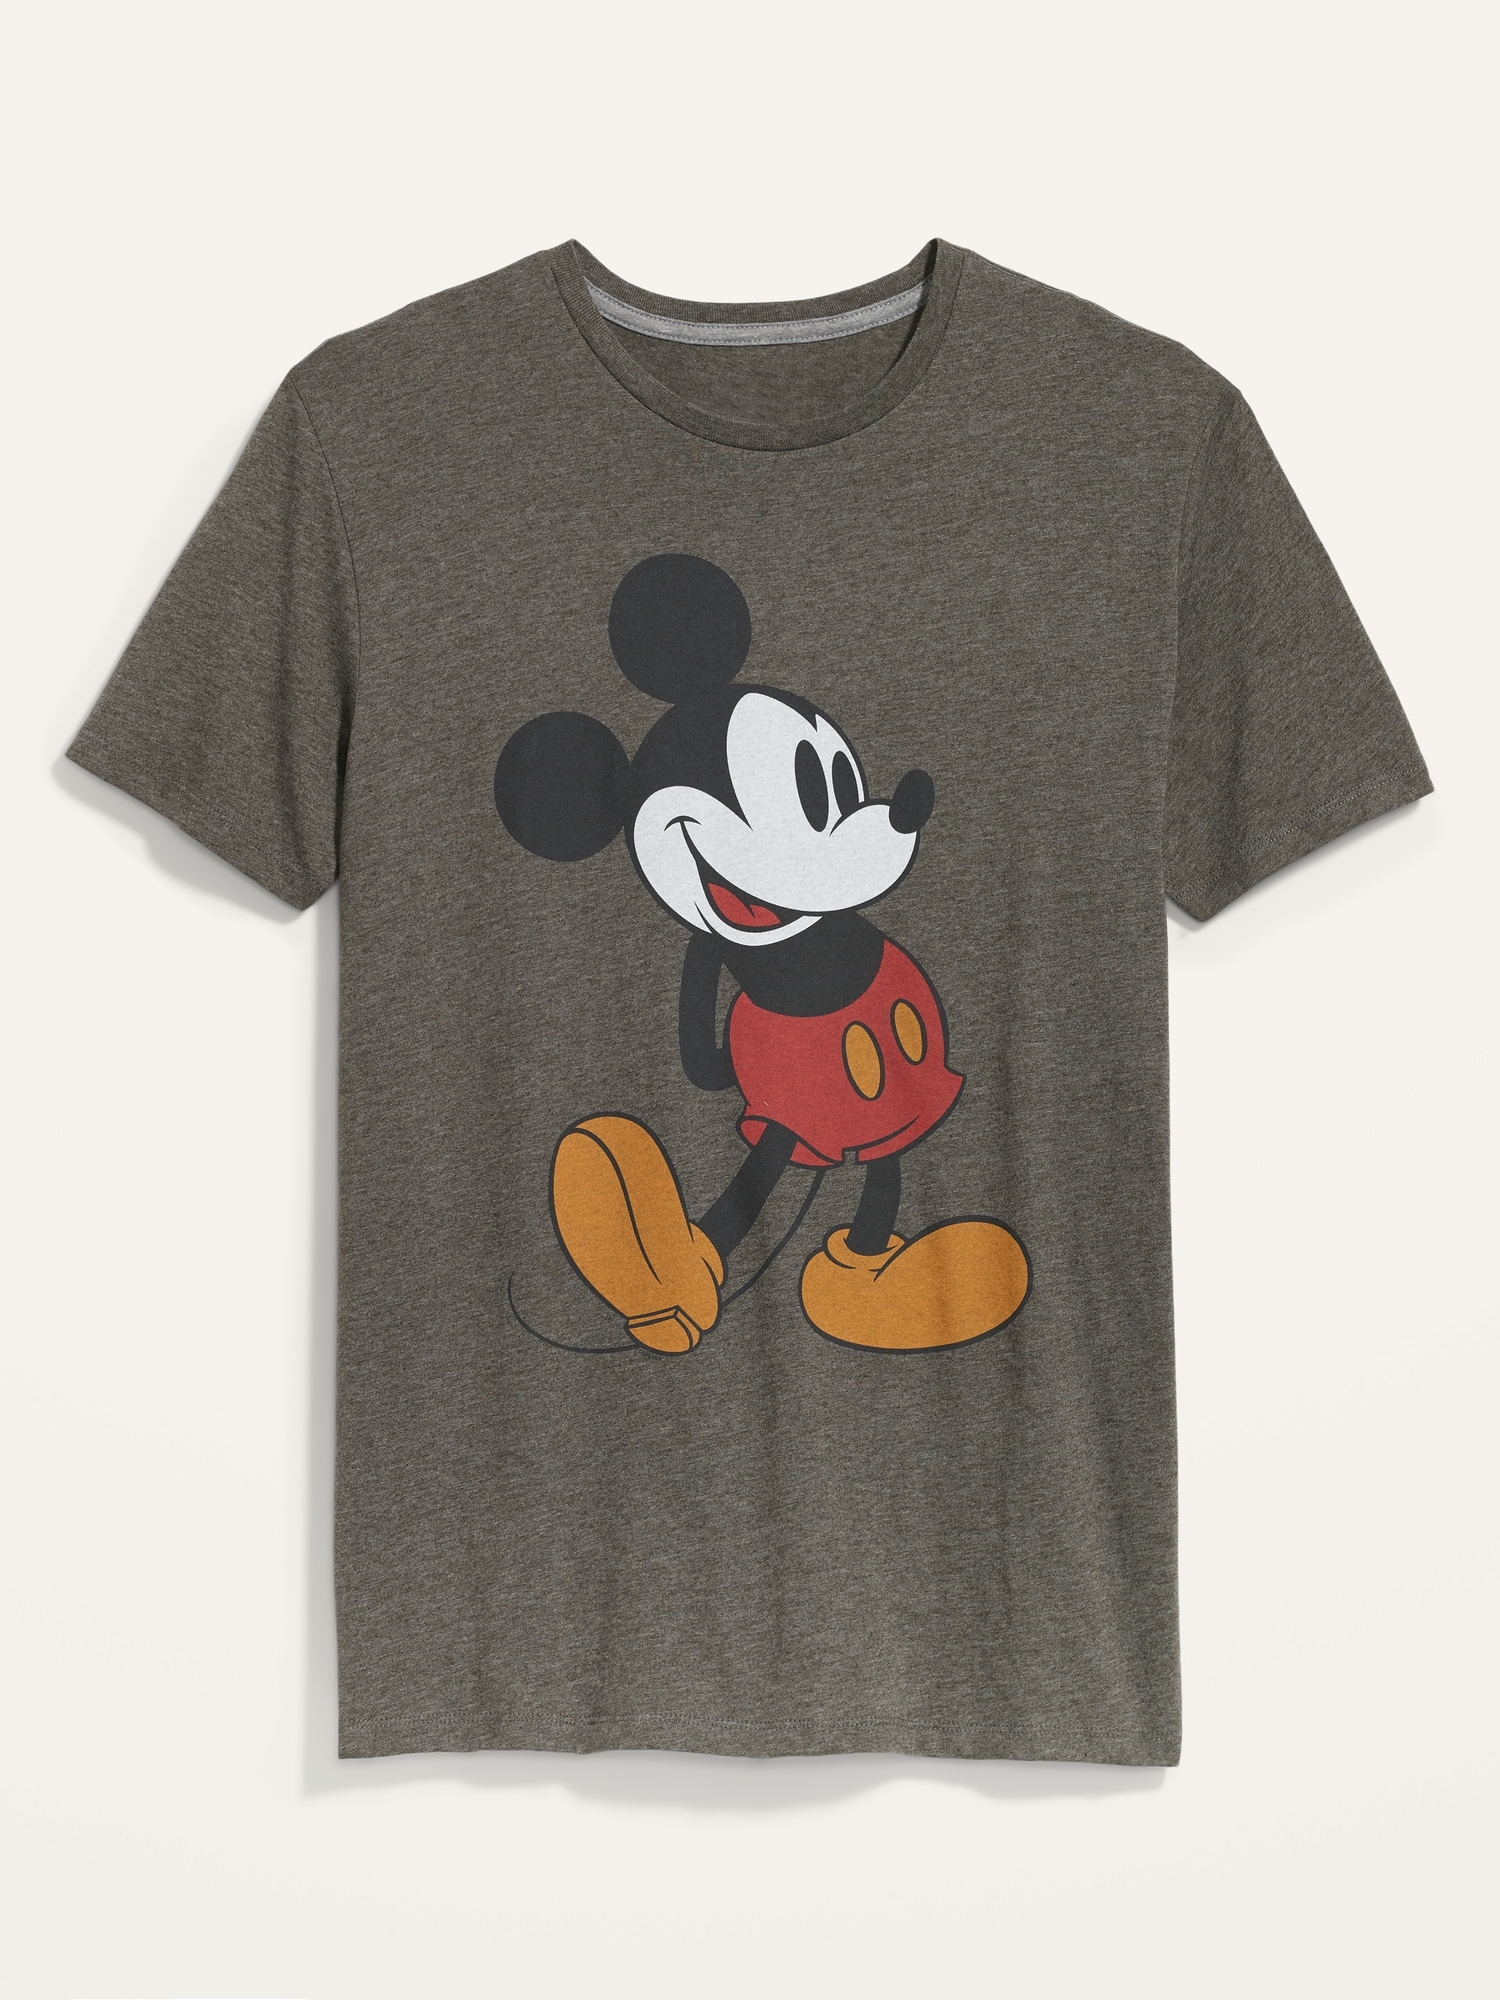 Men's Relaxed Mickey Mouse Graphic Tee, Men's Clearance